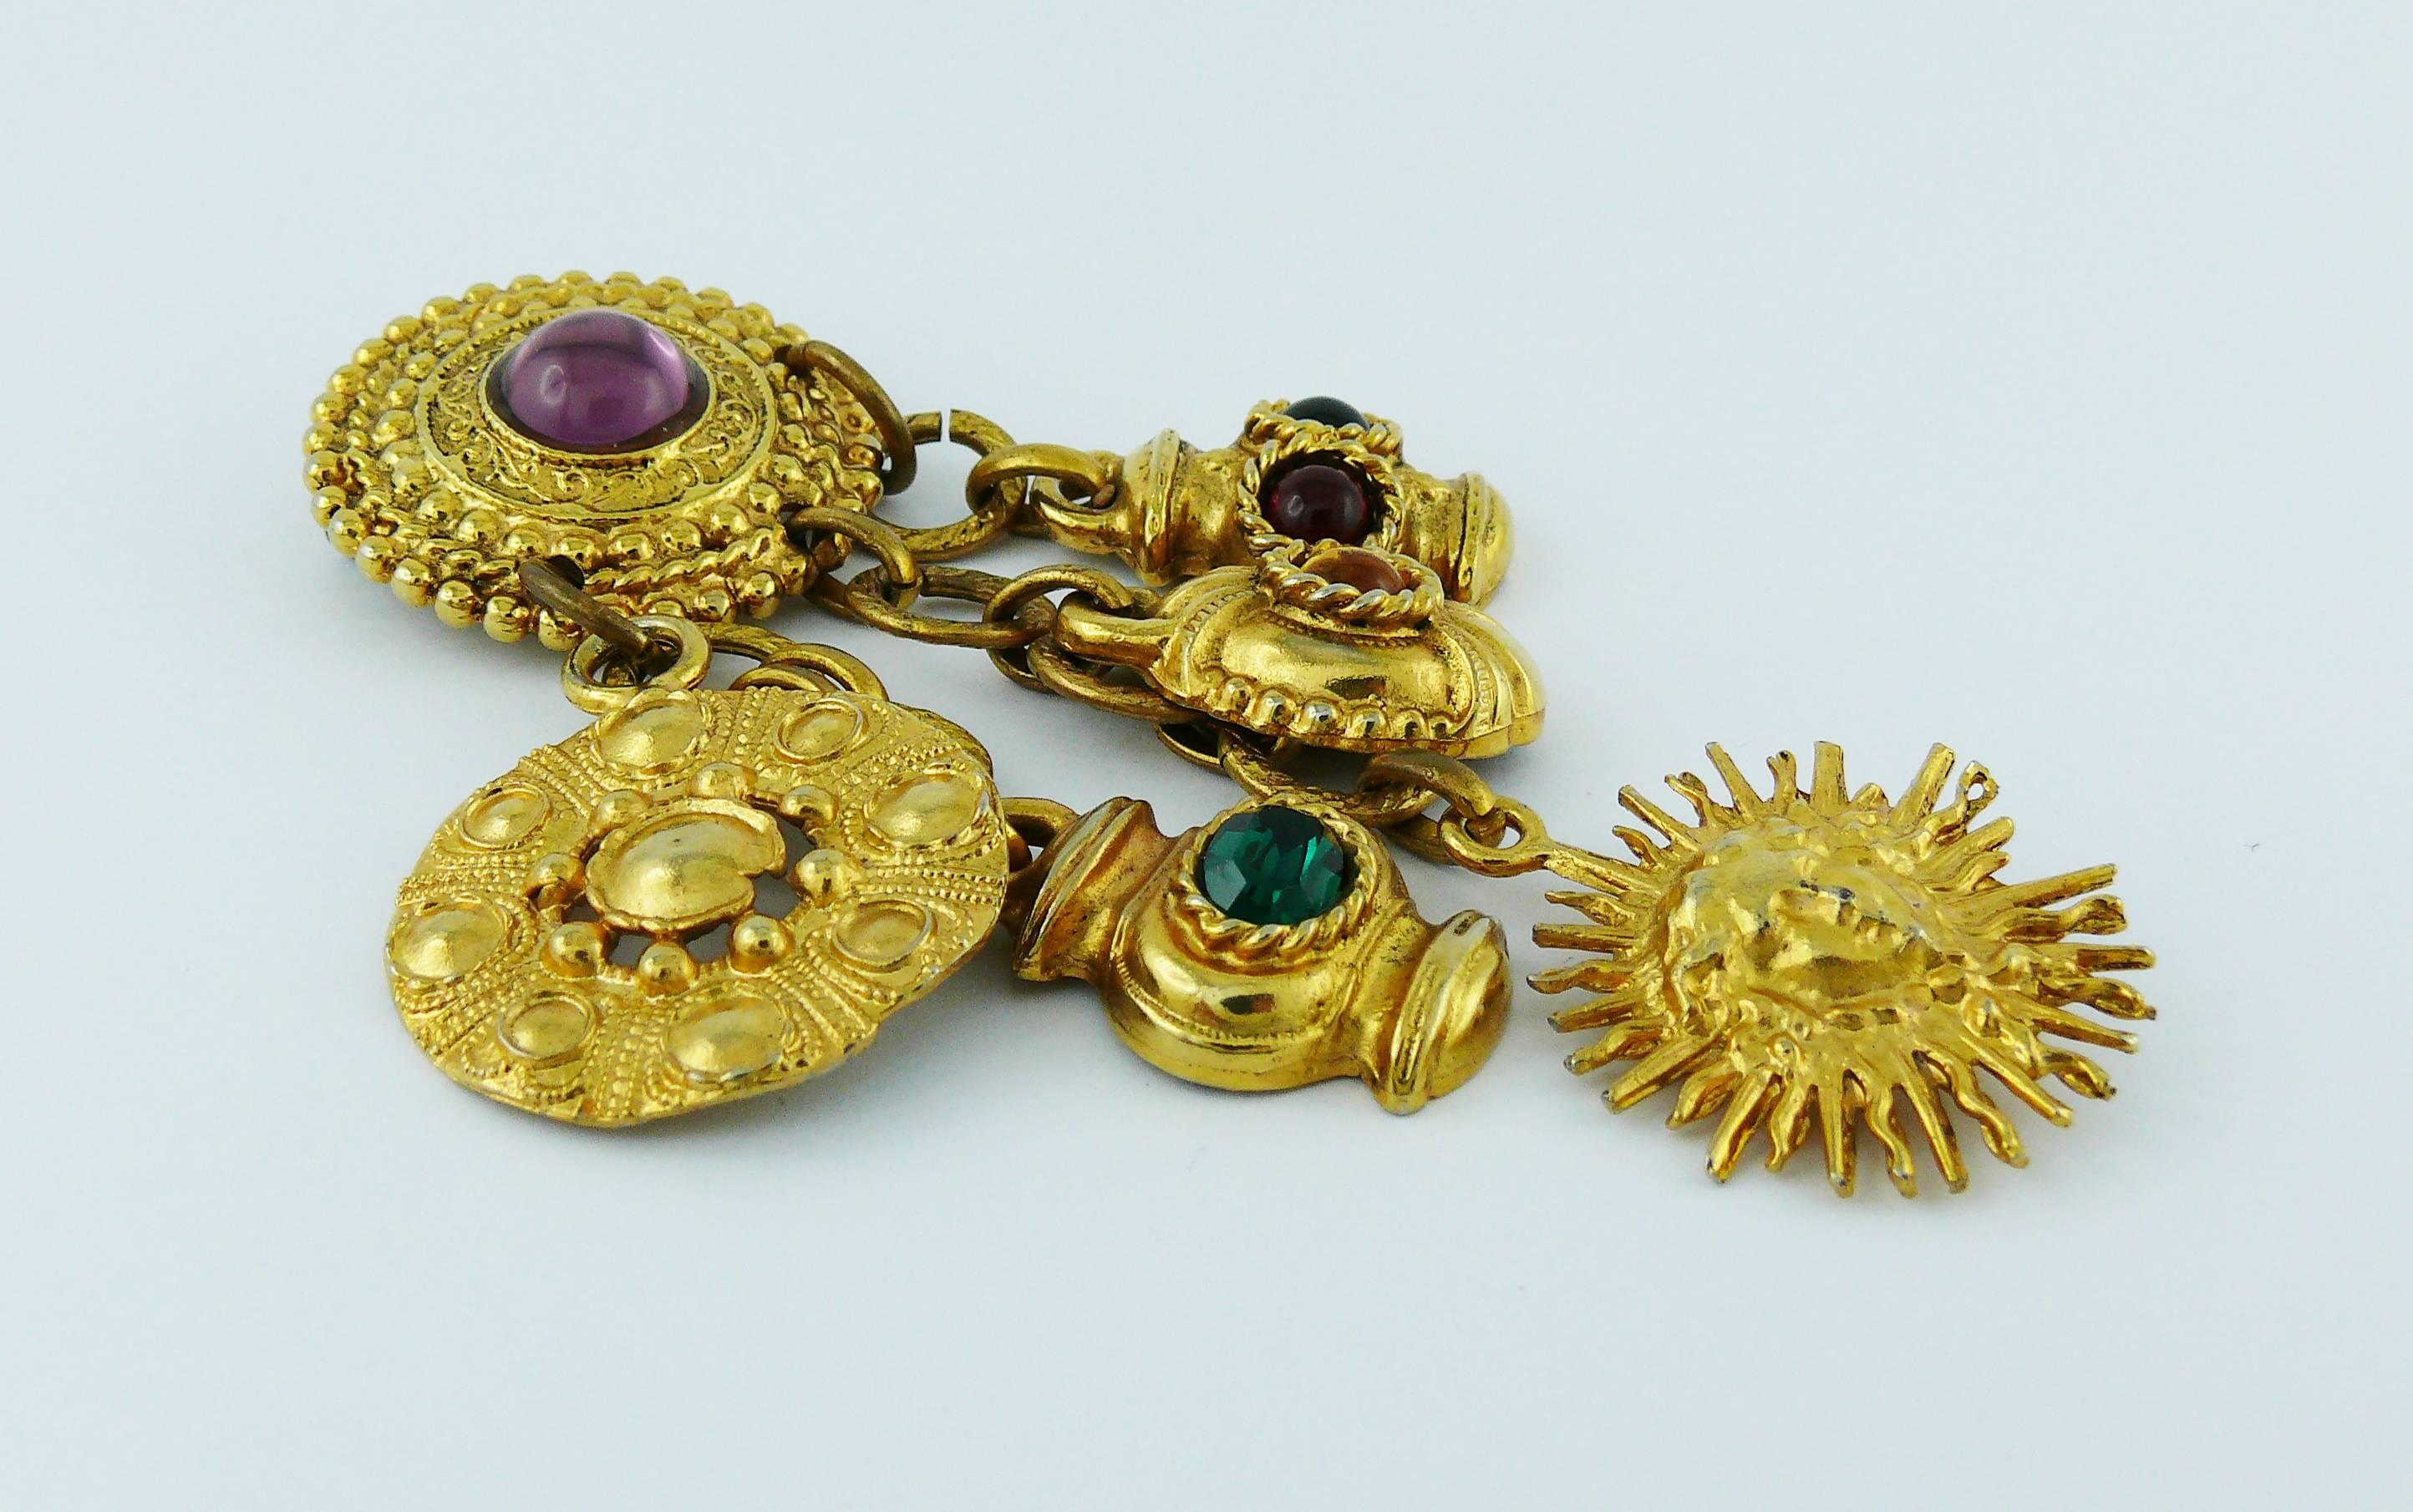 EDOUARD RAMBAUD vintage gold toned brooch featuring various charms embellished with multicolored glass cabochons and crystal.

Marked EDOUARD RAMBAUD Paris.

Indicative measurements : max. height approx. 10 cm (3.94 inches) / max. width approx. 4.3